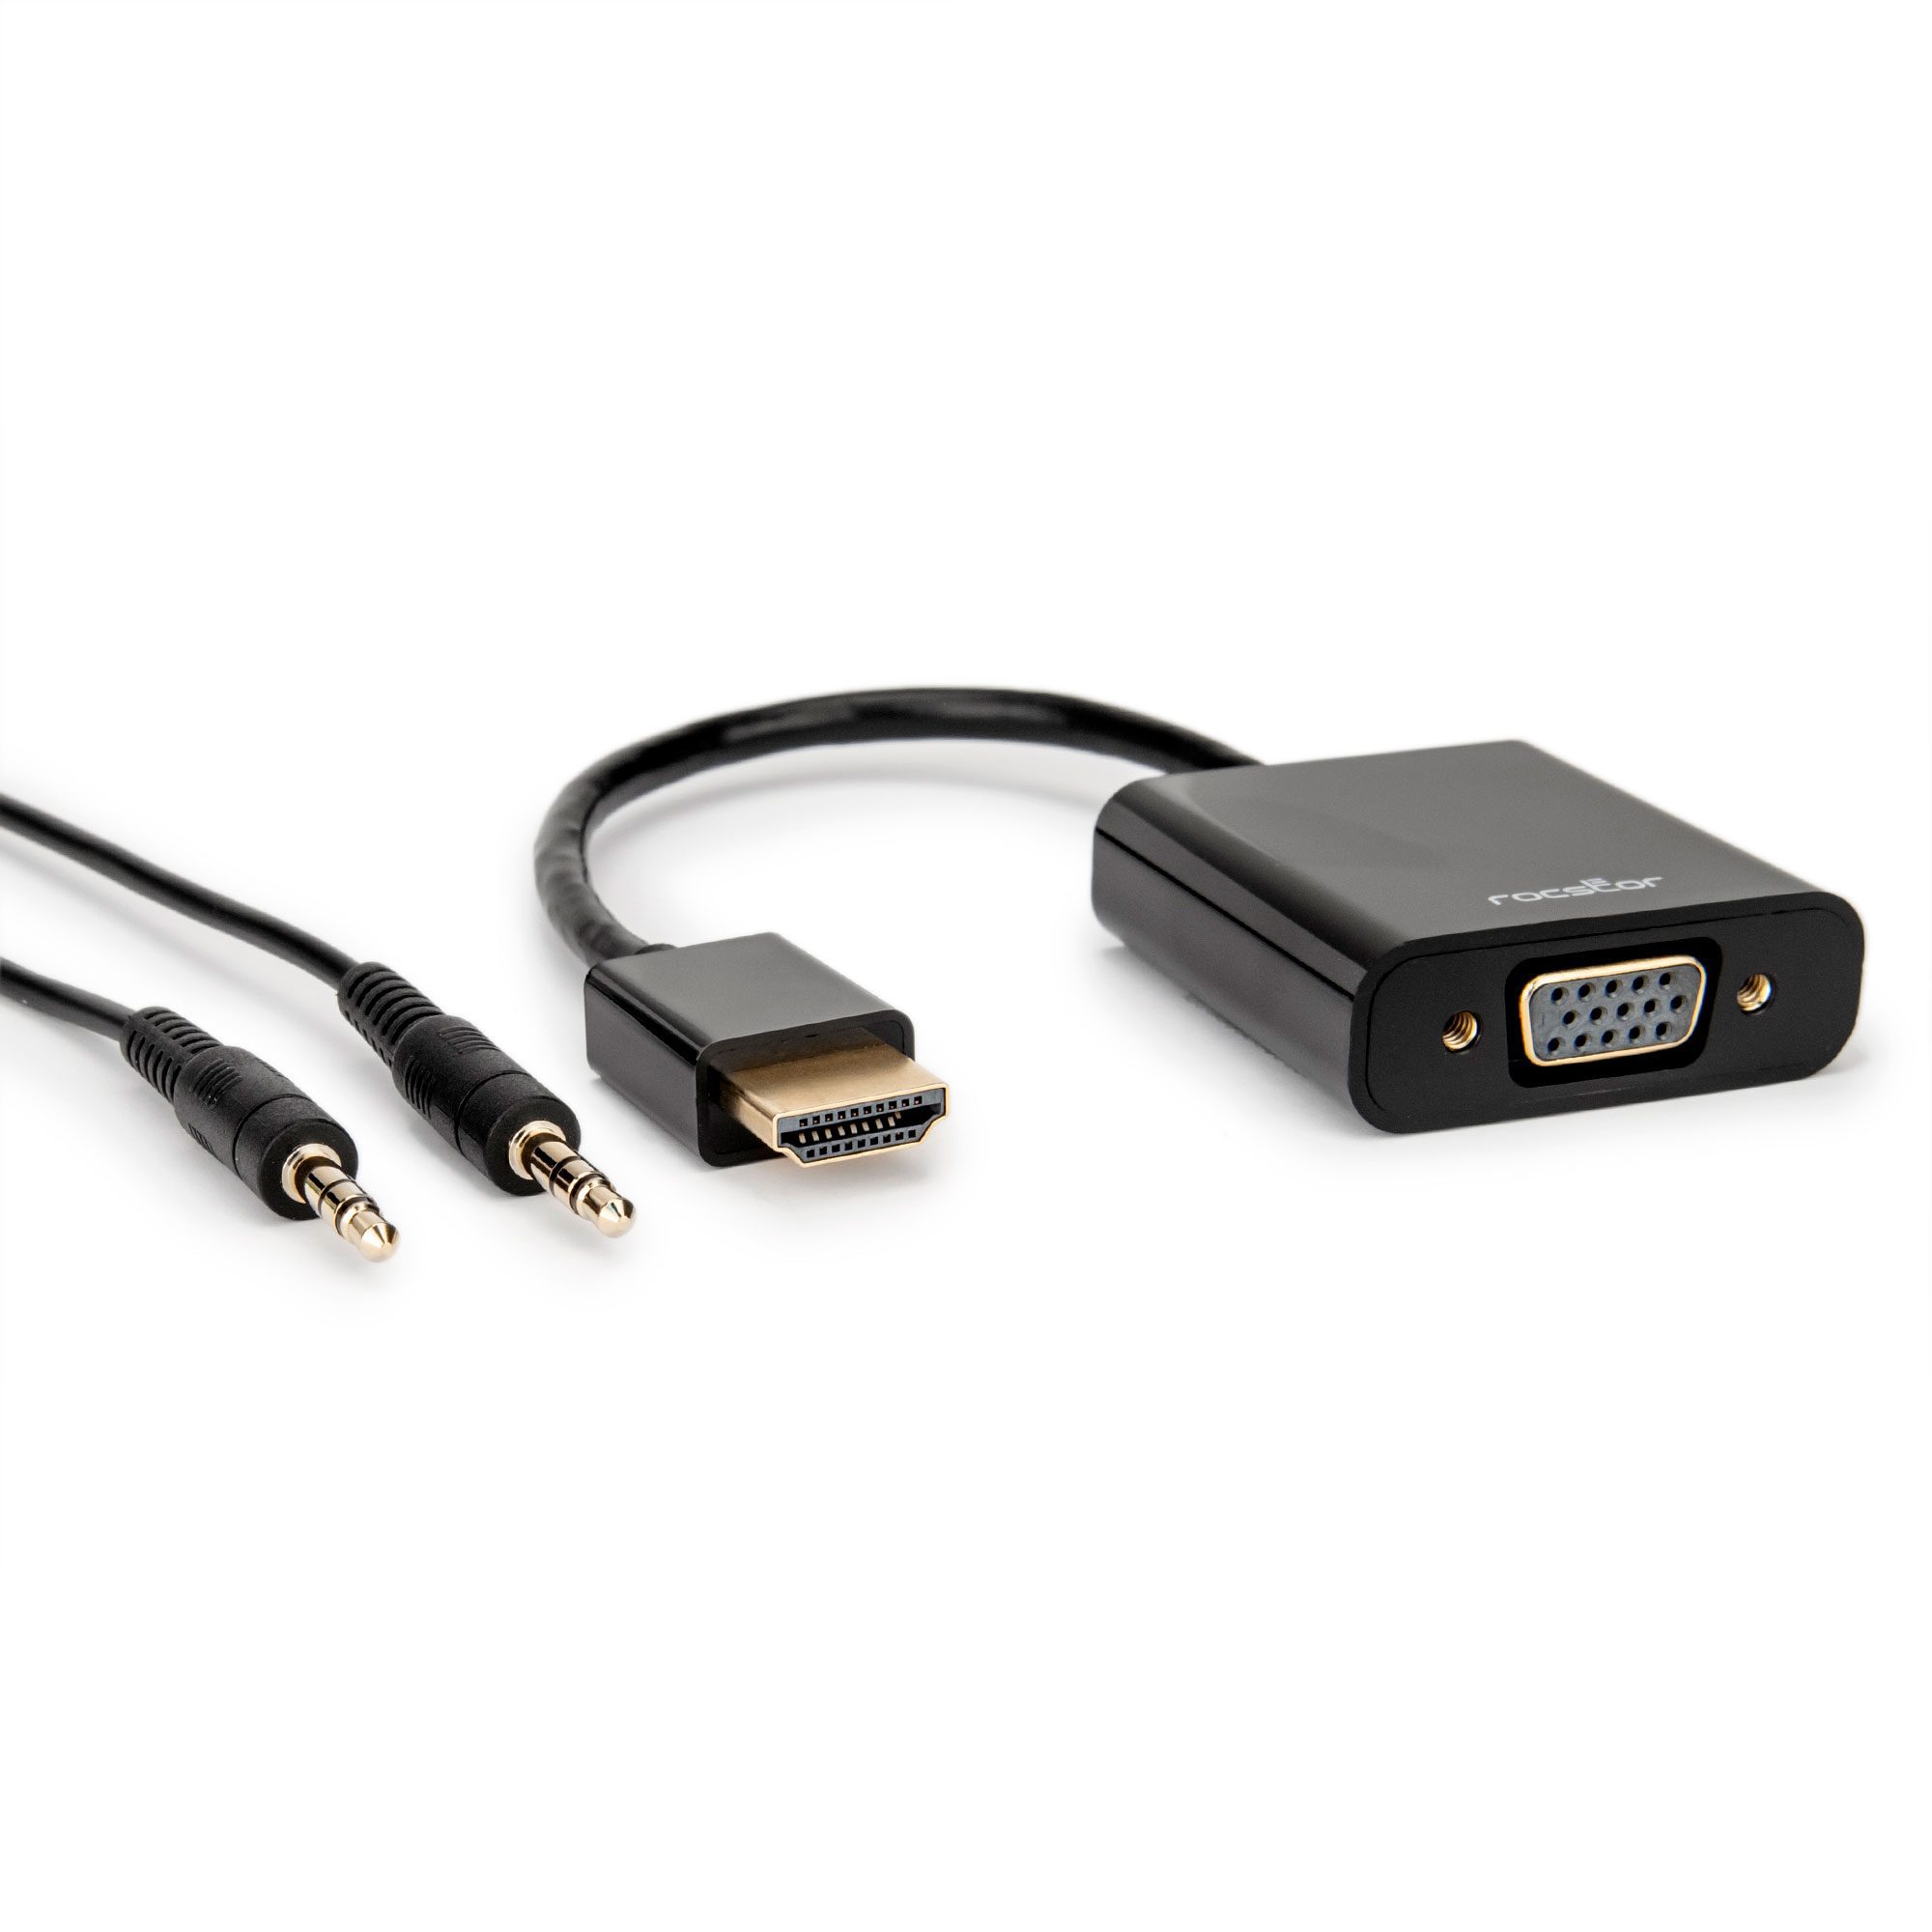 HDMI to VGA & 3.5mm Video Adapter Supports HD Rocstor